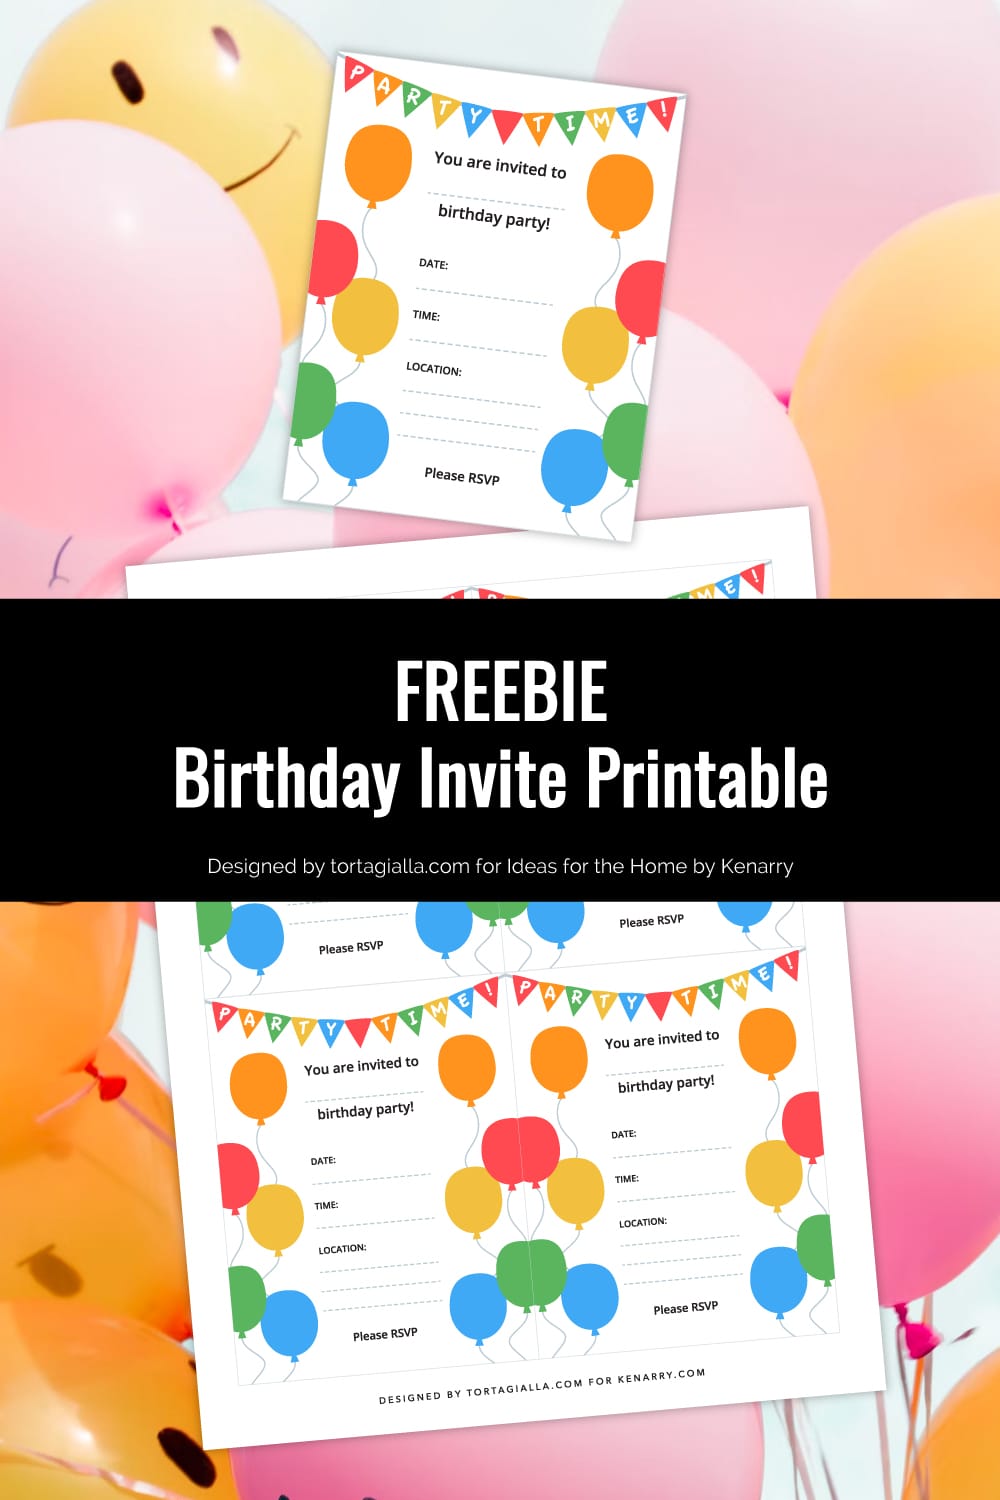 Preview of birthday party invite and printable page on top of orange and pink balloons background.